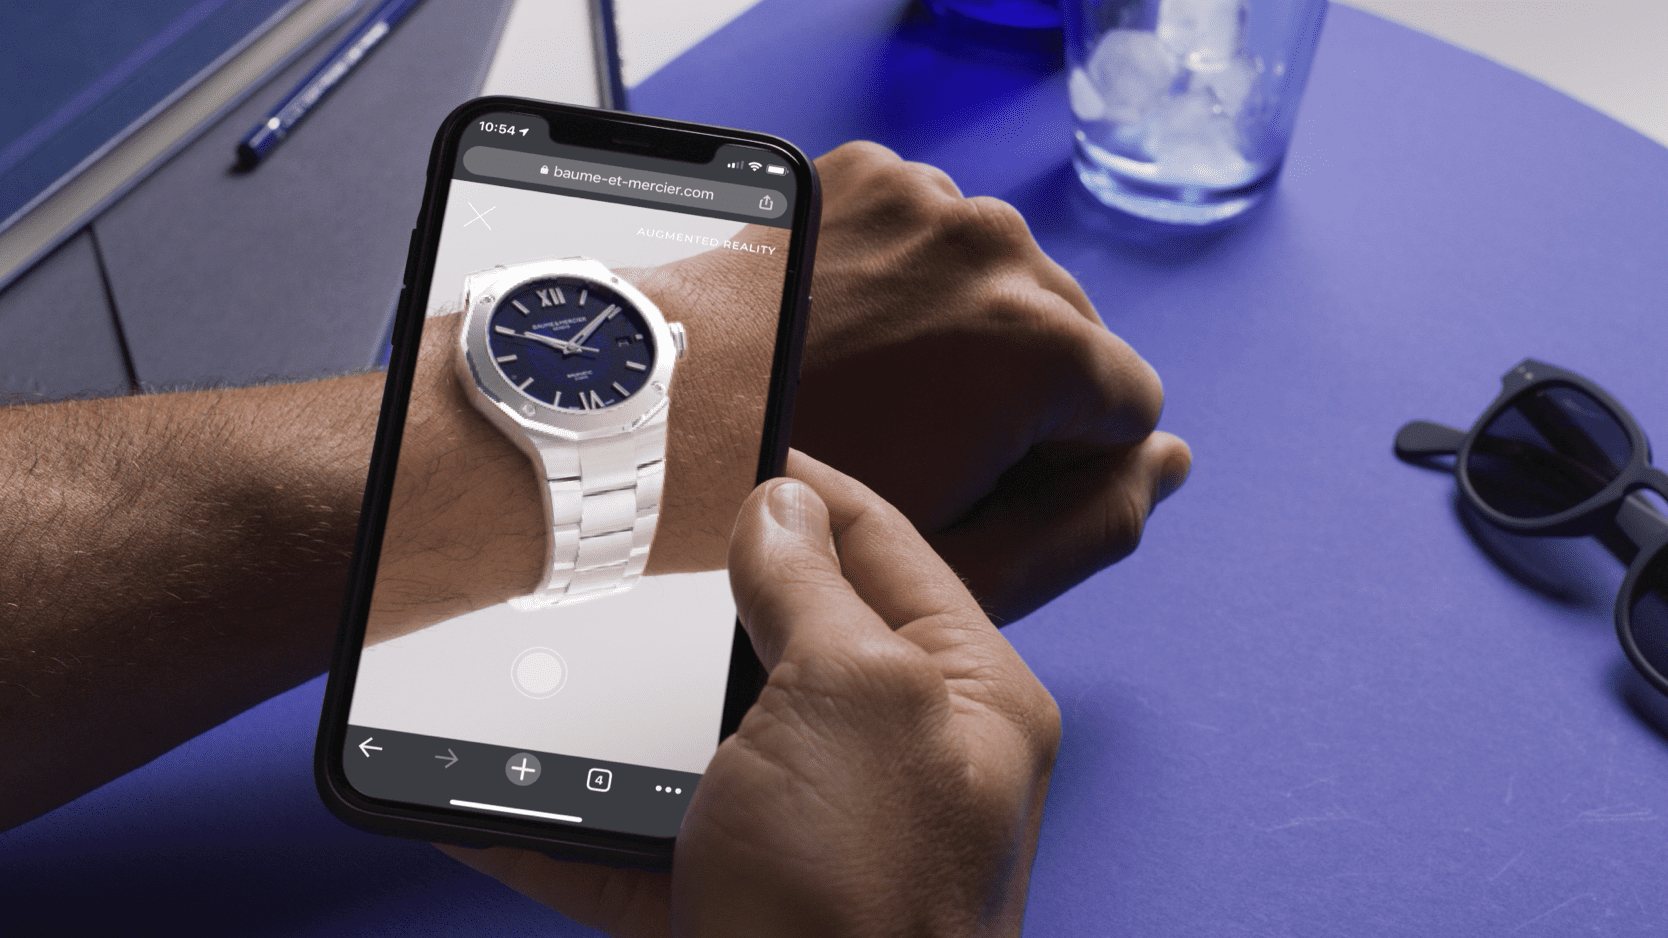 Baume & Mercier updates their digital sales experience with the Virtual Try-On System